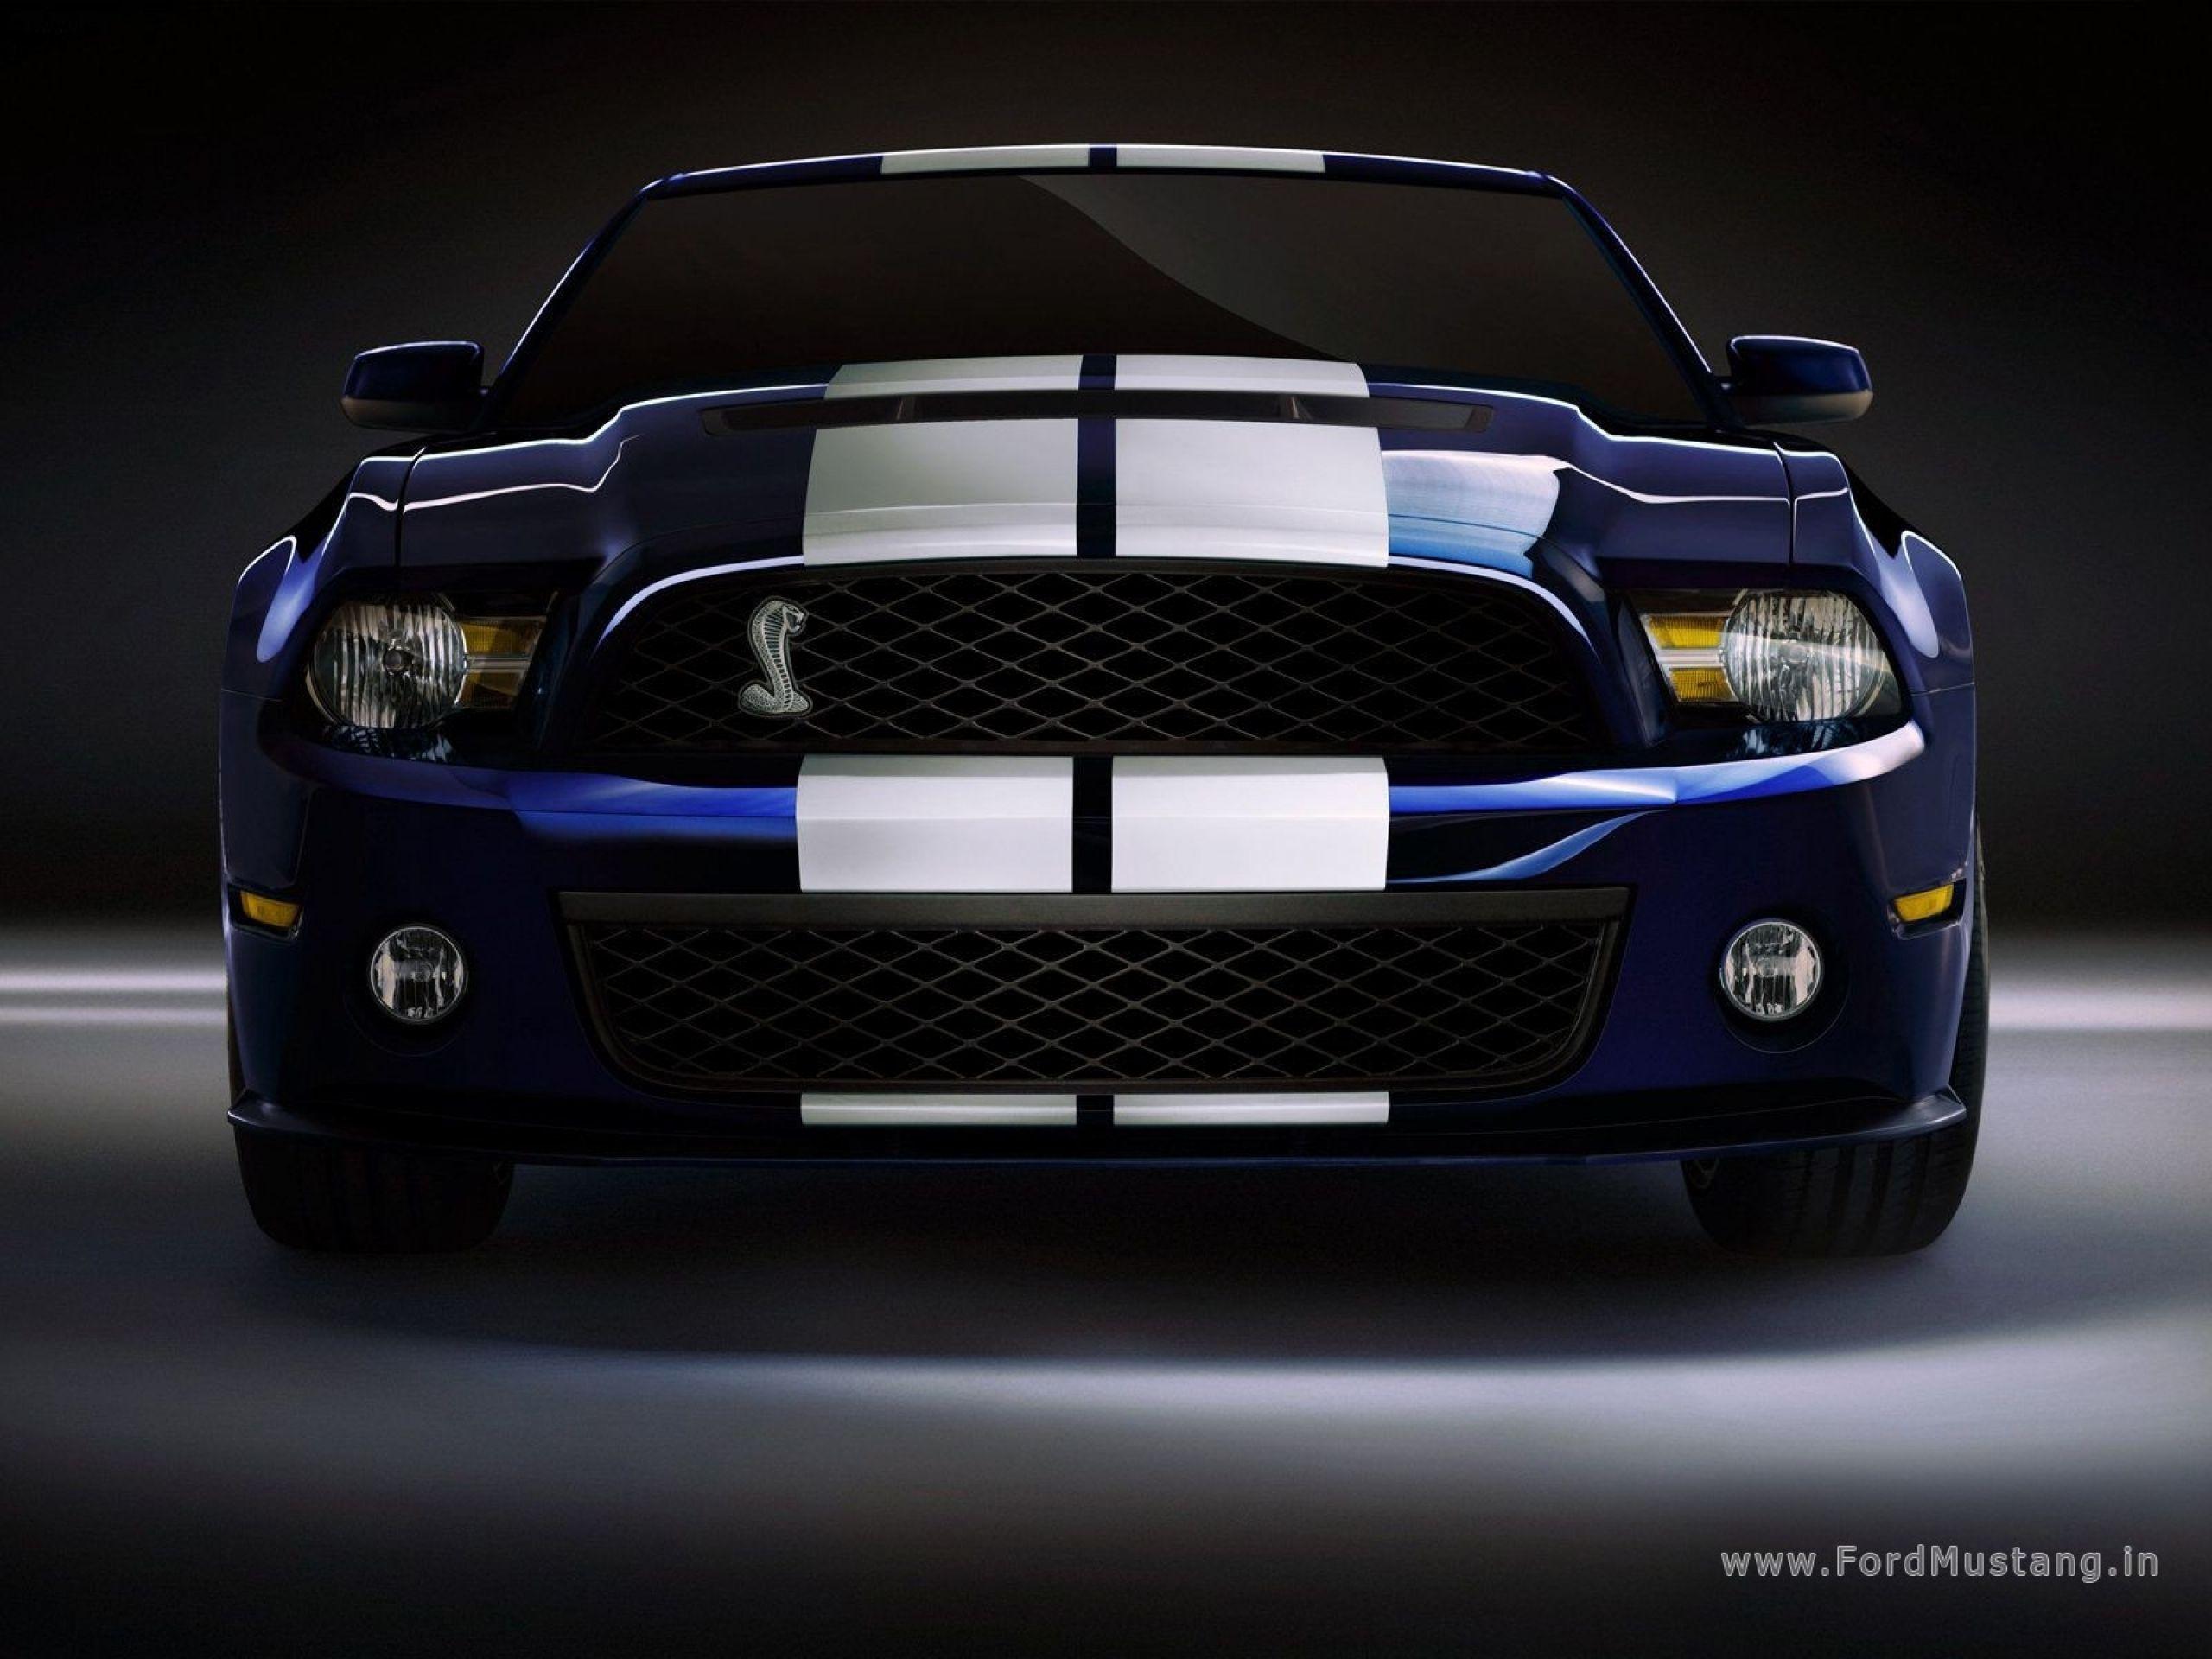 Ford Mustang Shelby GT500 Wallpaper, Picture, Image